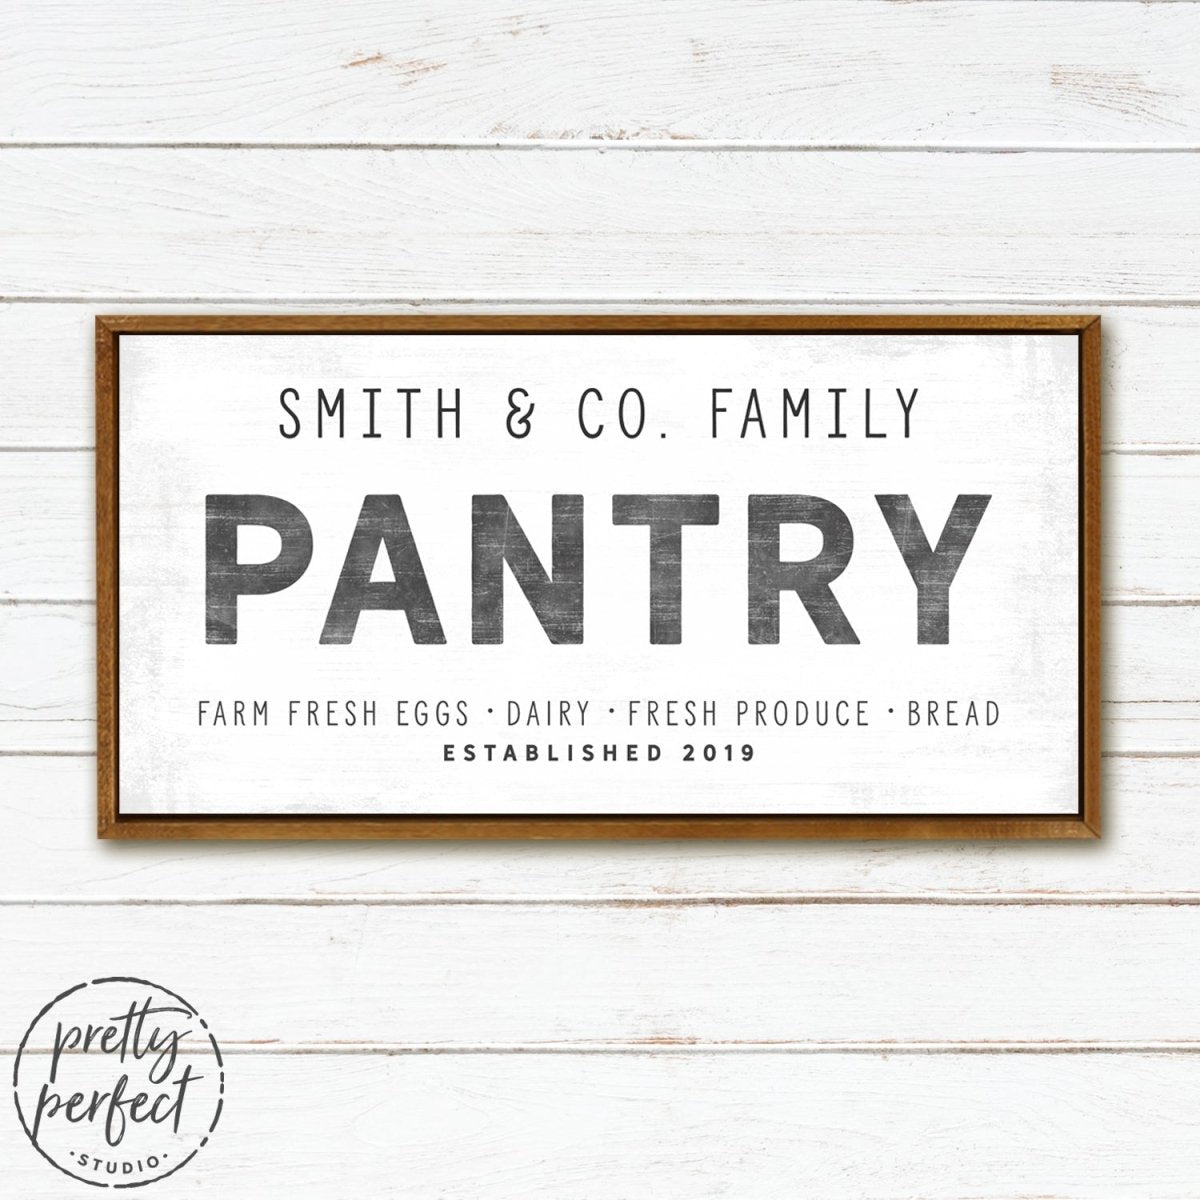 Personalized Pantry Sign With Name & Established Date - Pretty Perfect Studio